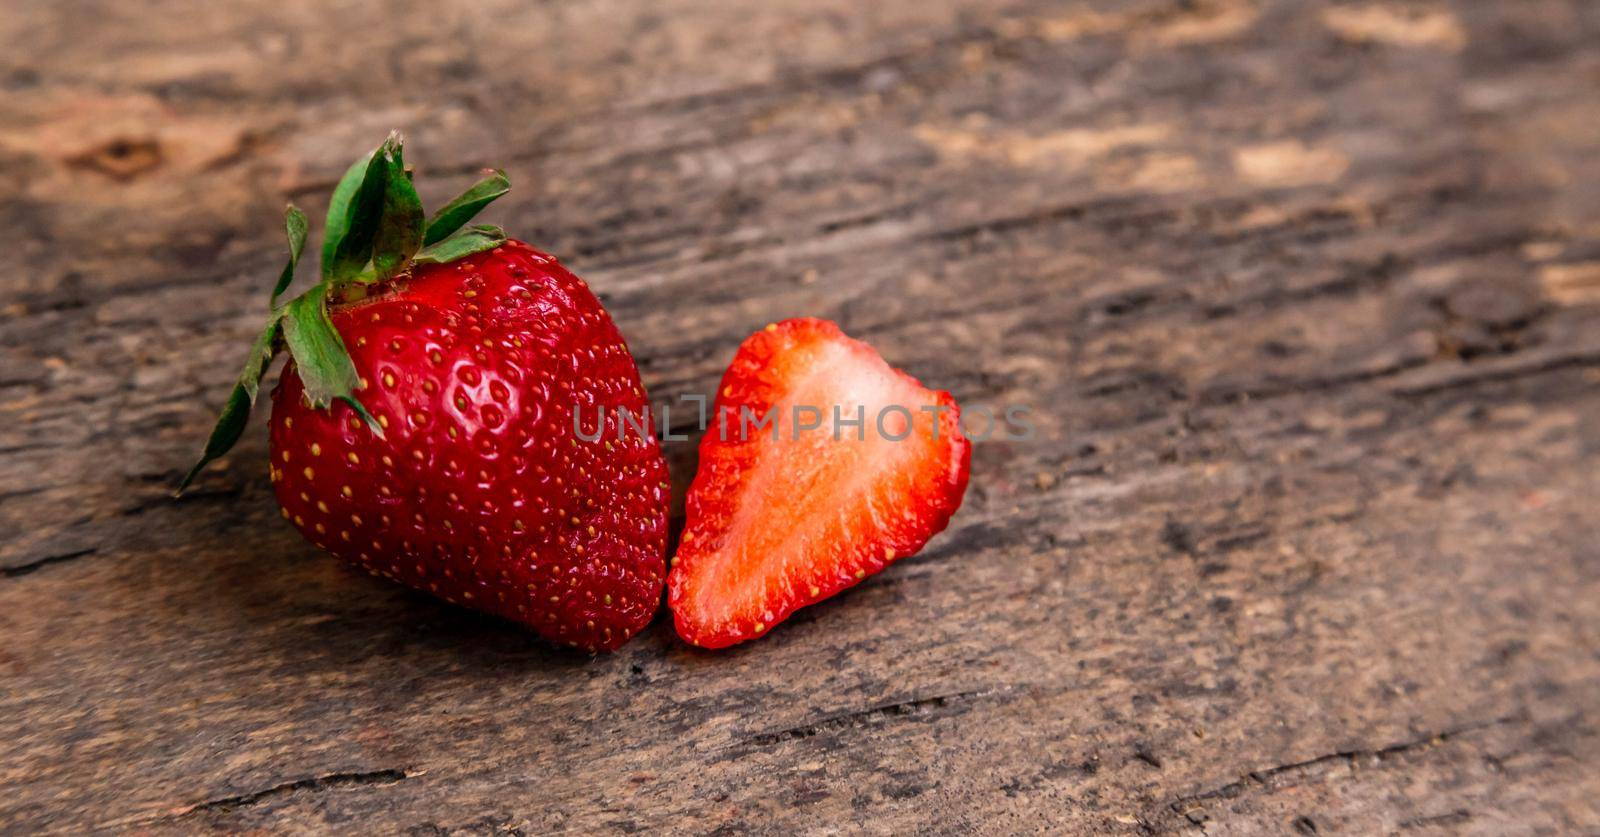 One whole strawberry and one half strawberry on a dark wooden surface with space to write on the right.